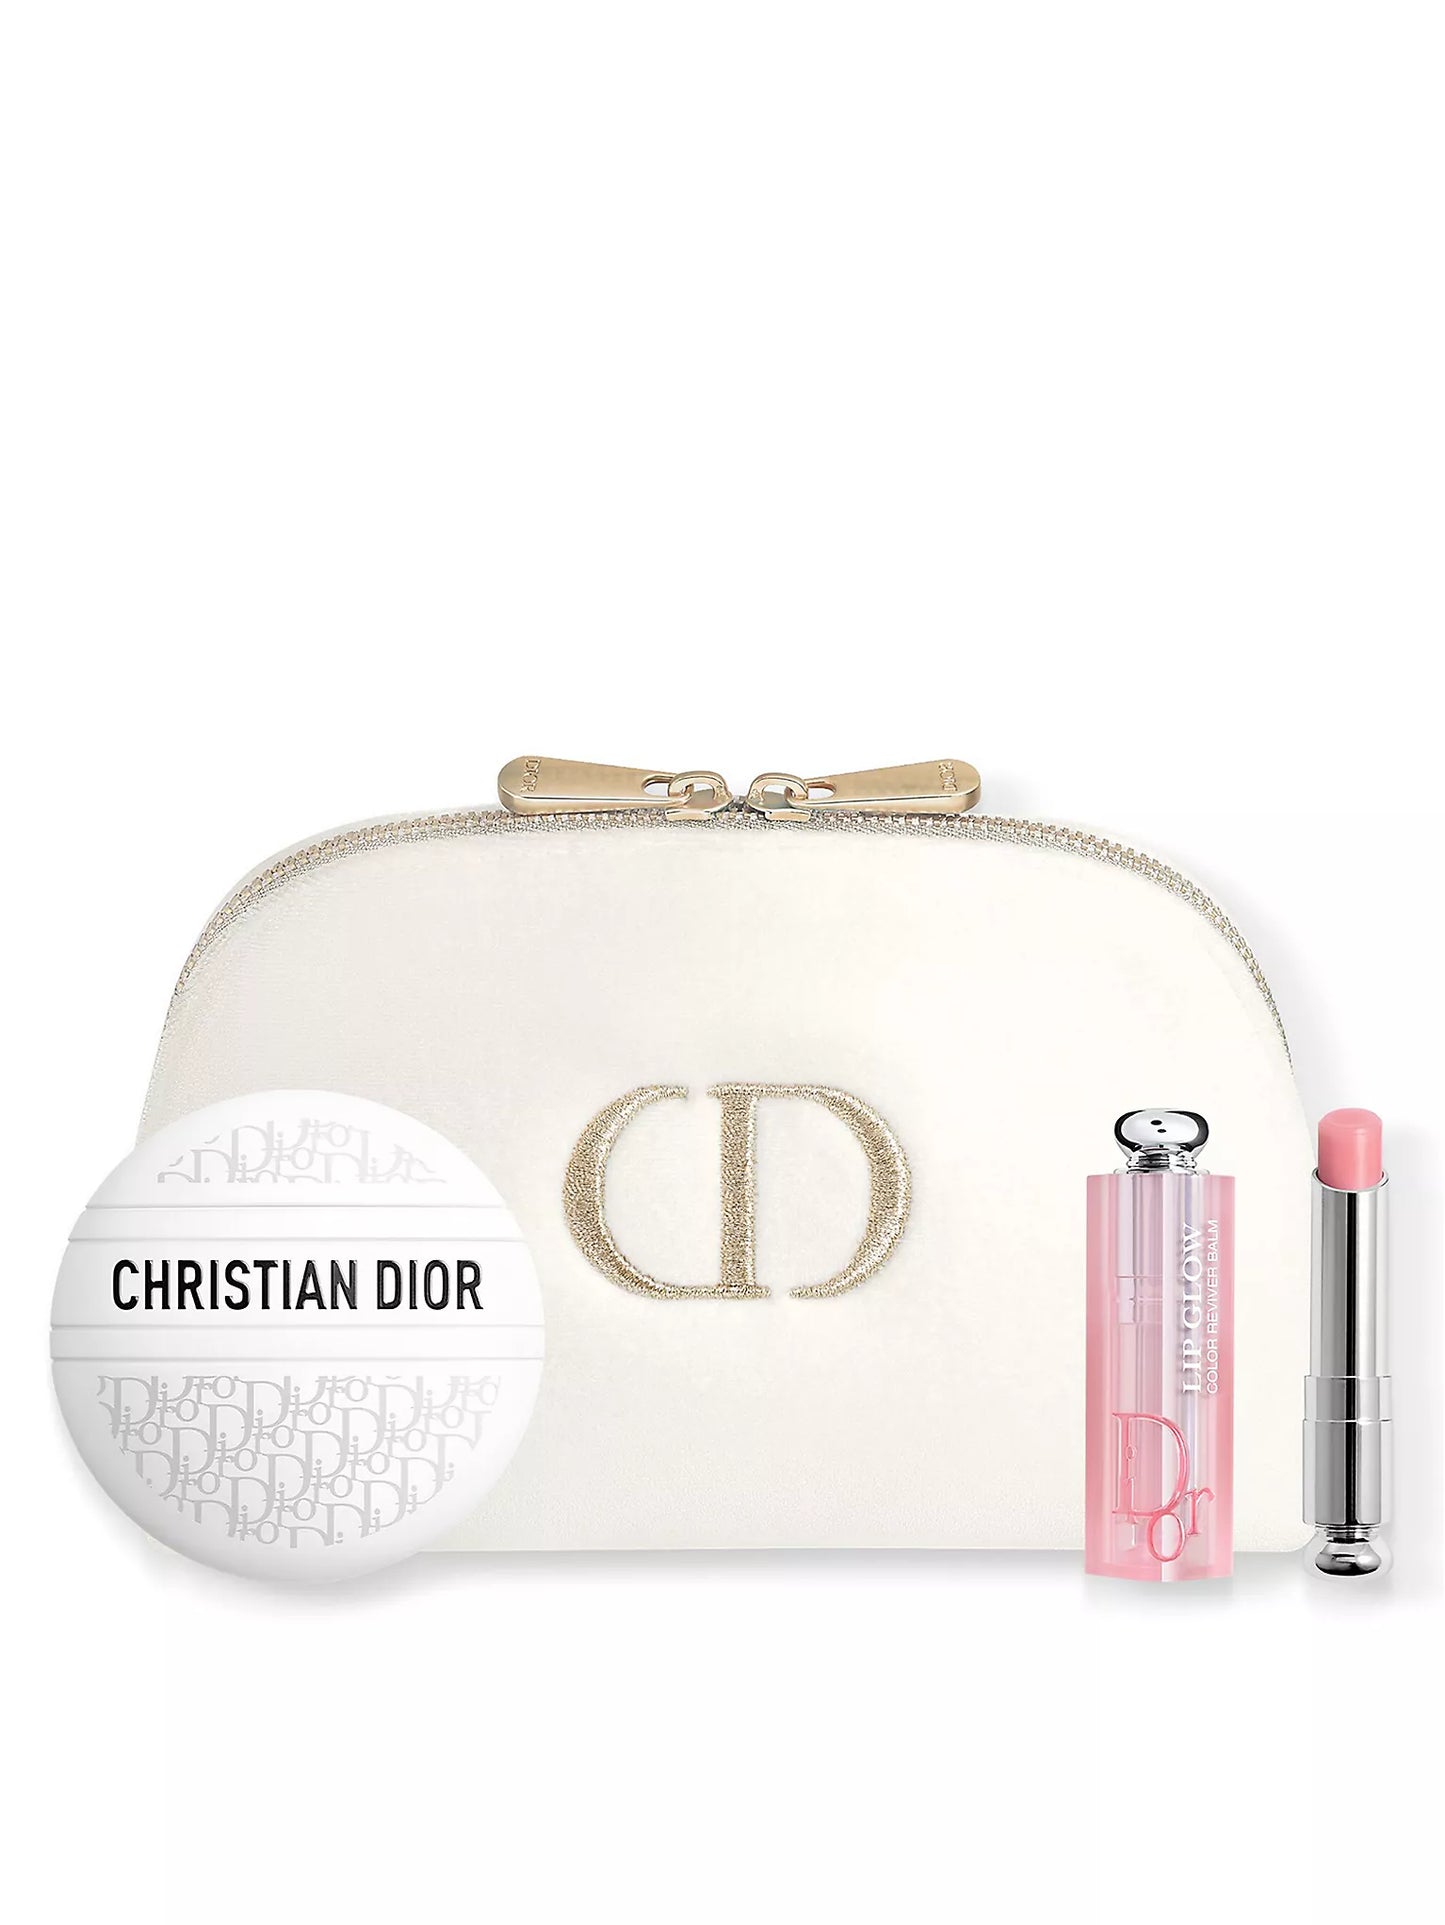 DIOR, The Beauty Care Ritual limited-edition gift set